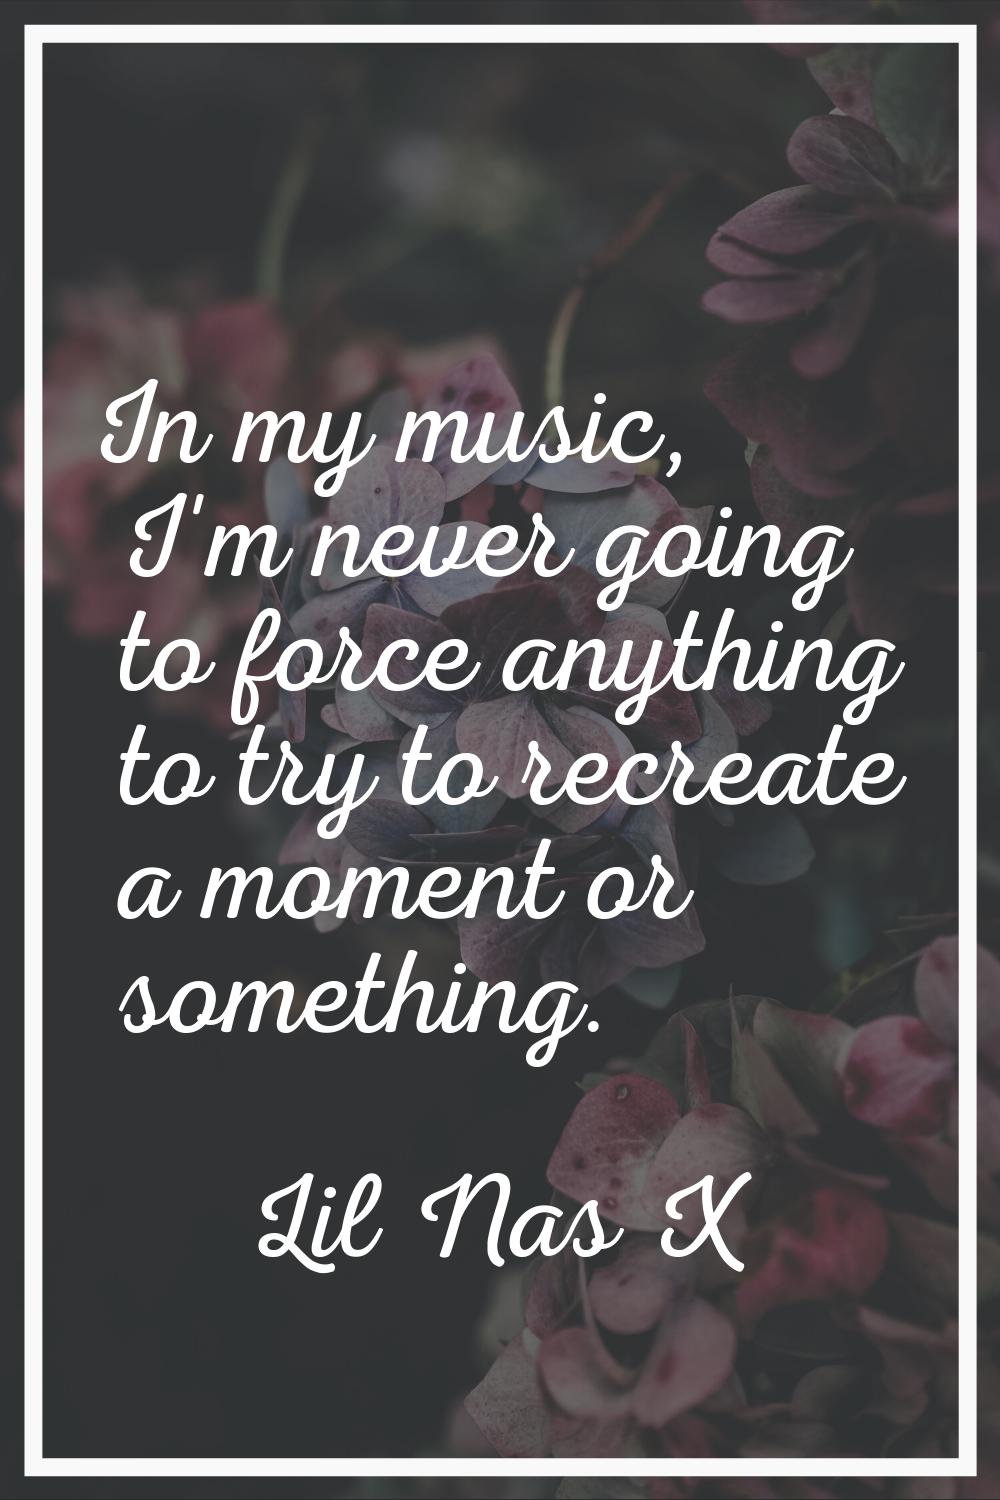 In my music, I'm never going to force anything to try to recreate a moment or something.